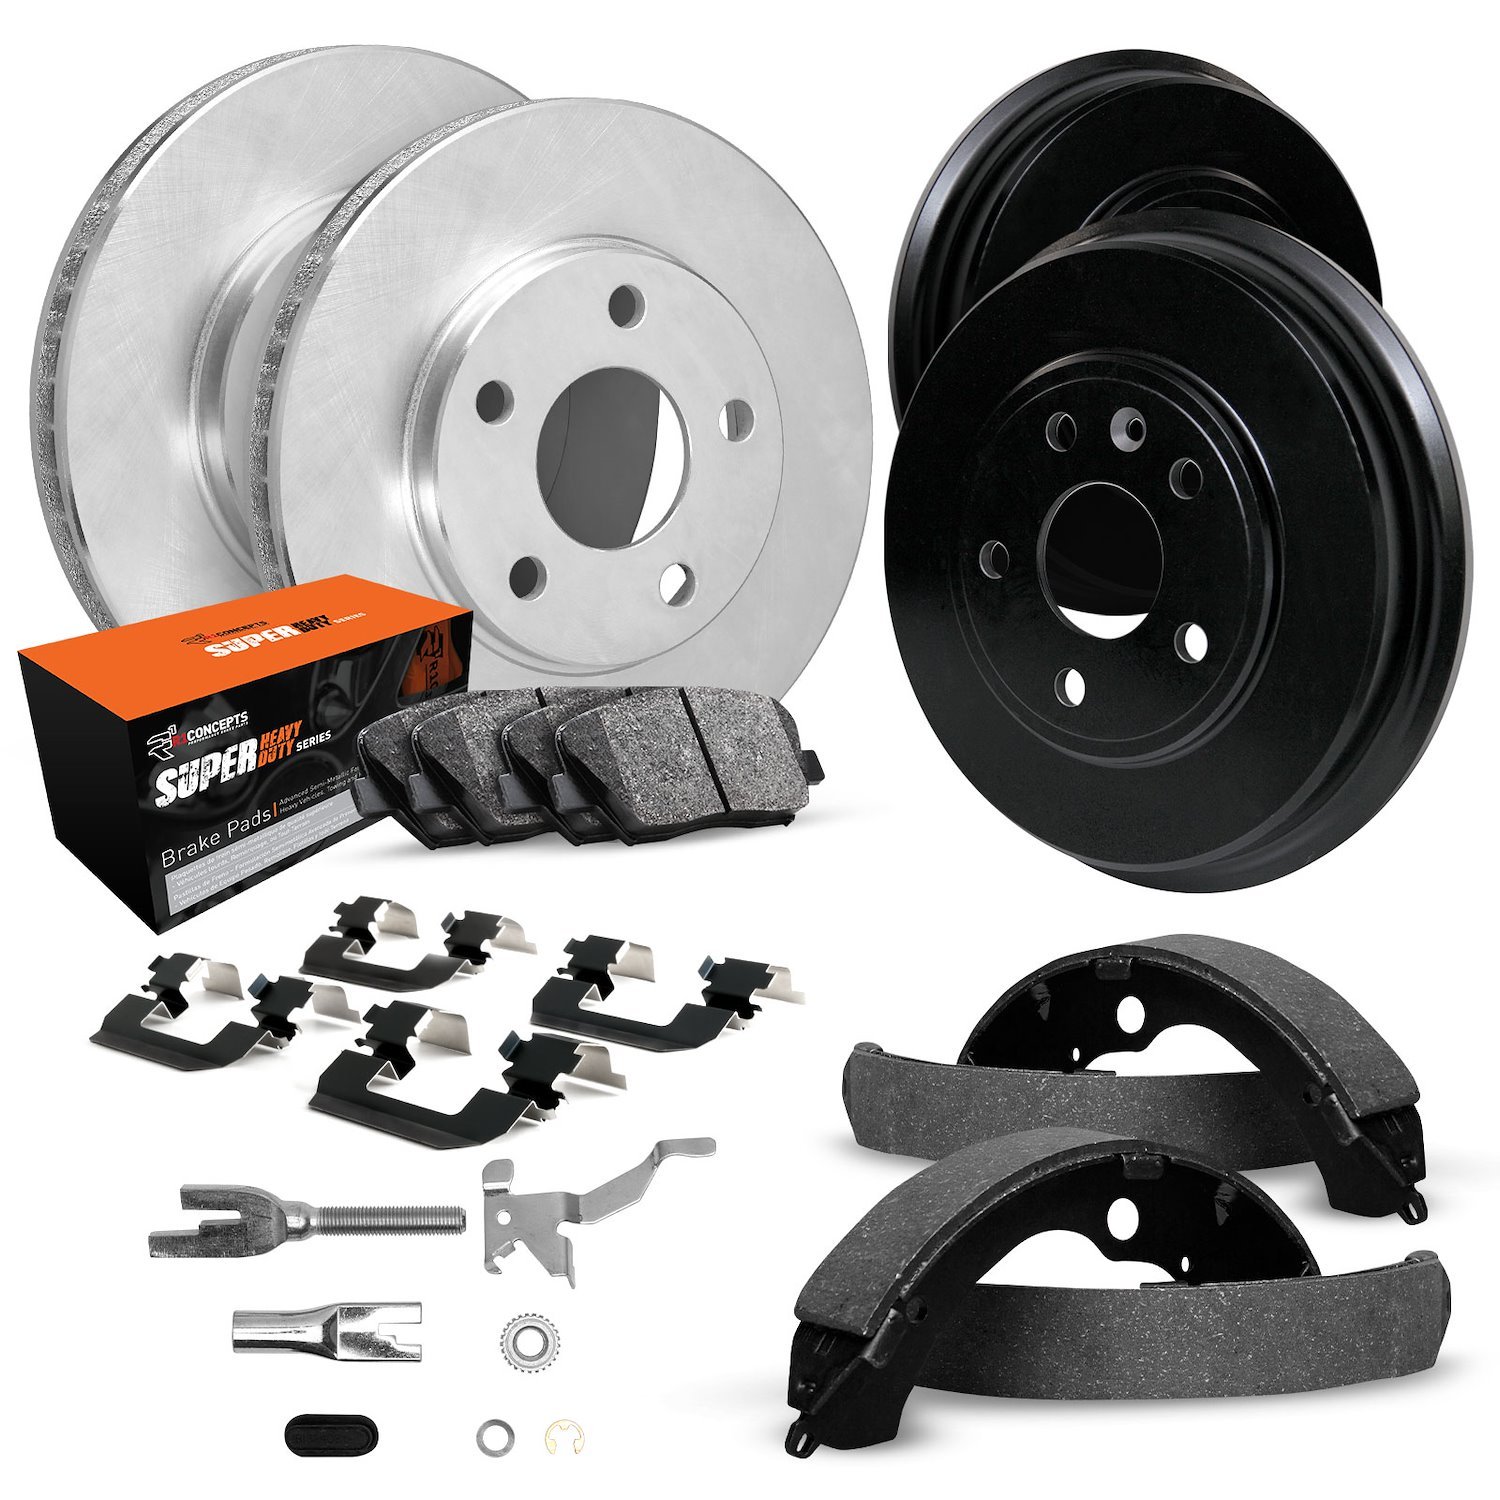 E-Line Blank Brake Rotor & Drum Set w/Super-Duty Pads, Shoes, Hardware, & Adjusters, 1988-1999 GM, Position: Front & Rear